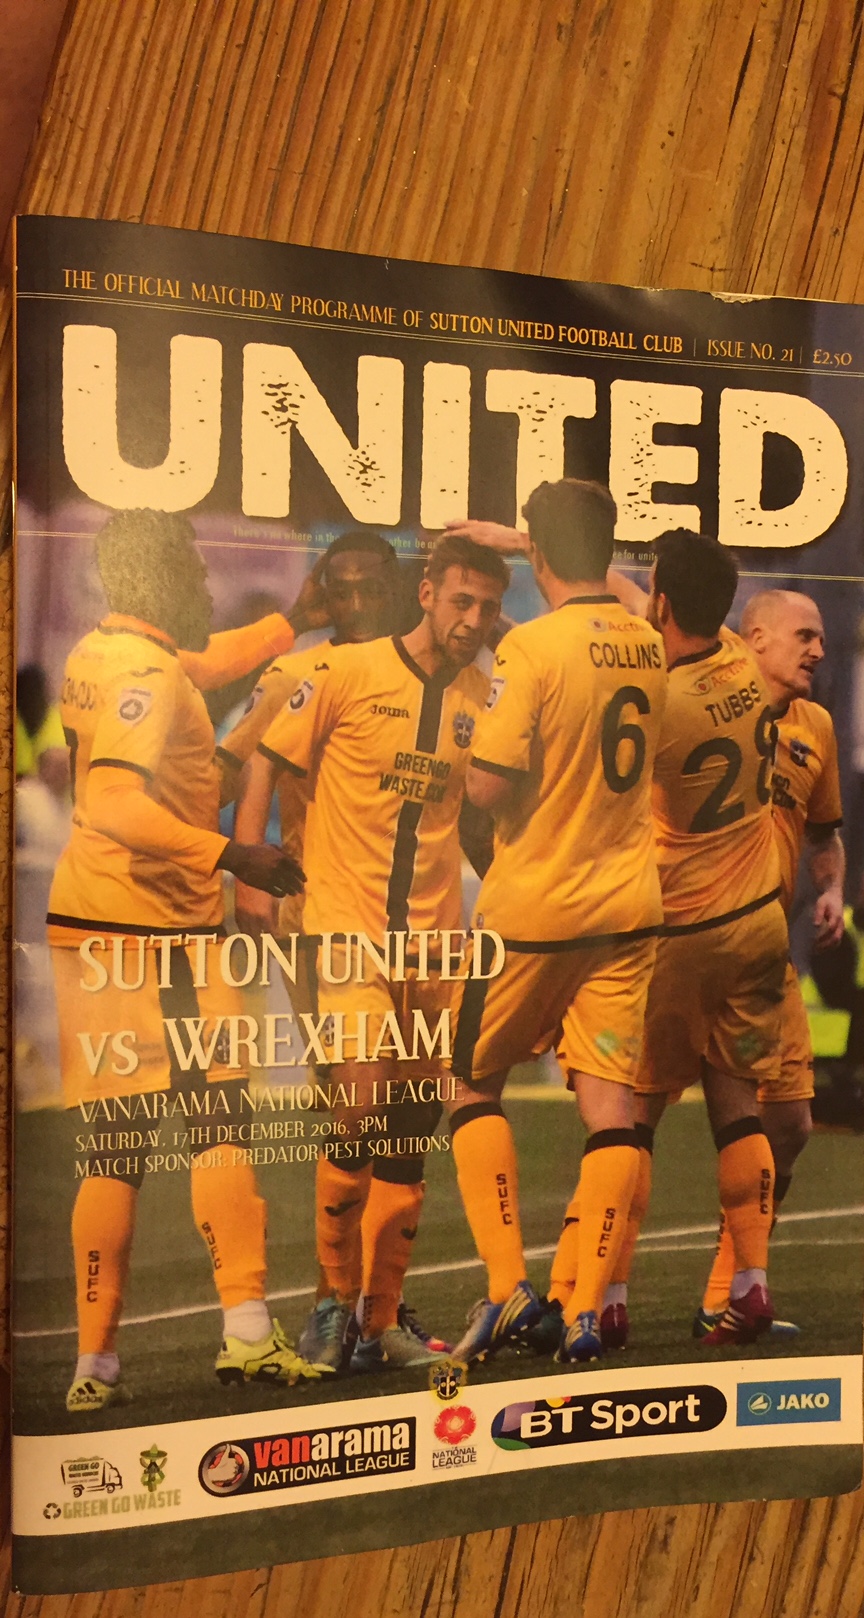 Old Bears - Sutton United Football Programme cover.